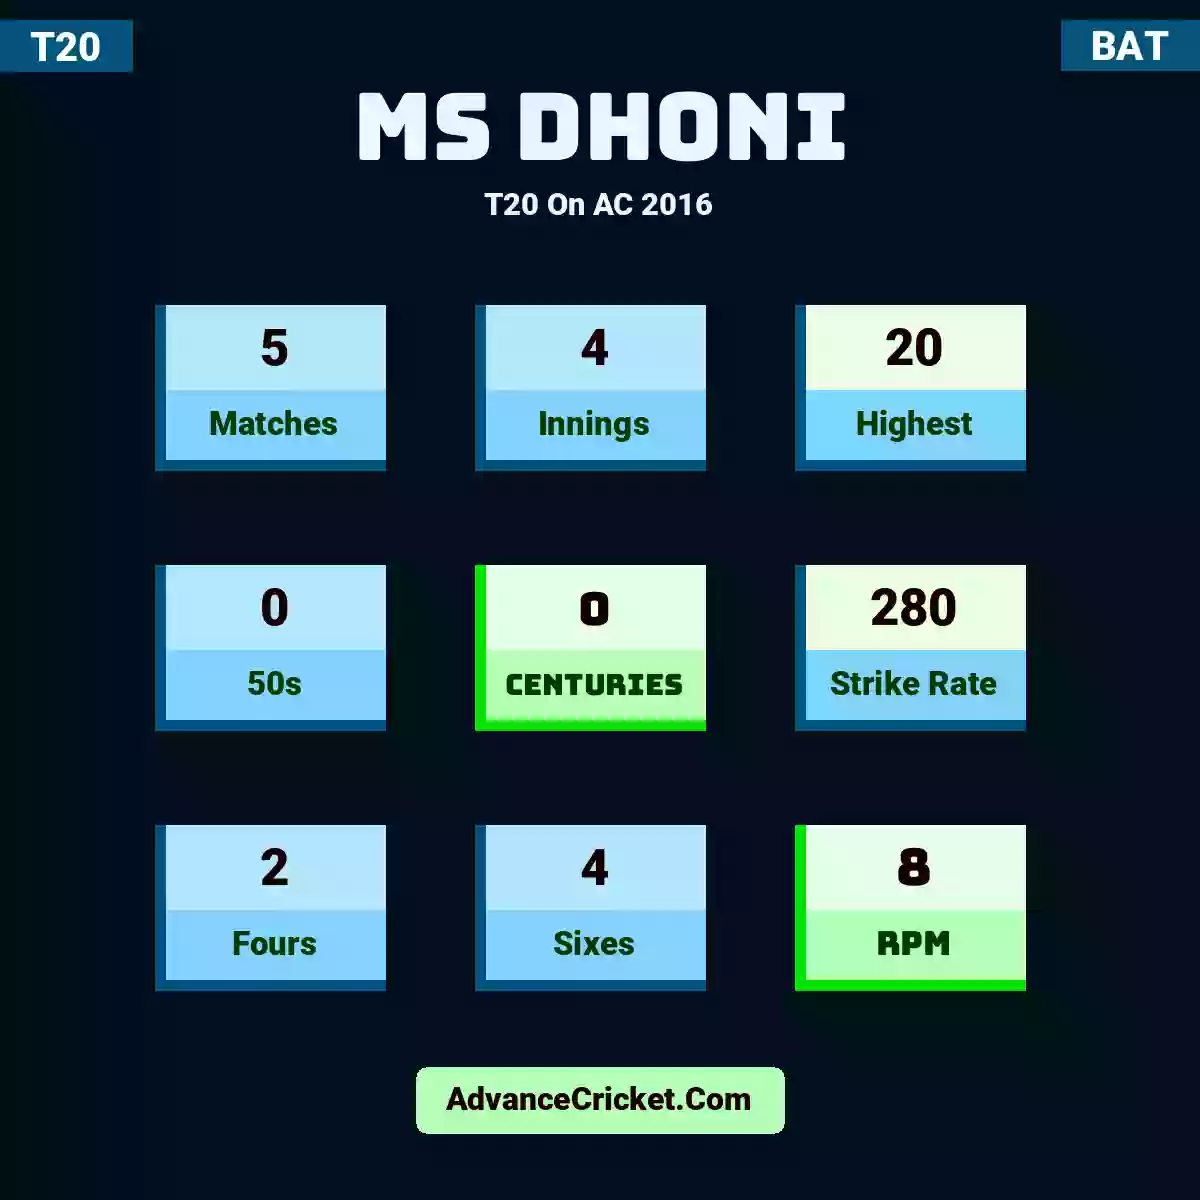 MS Dhoni T20  On AC 2016, MS Dhoni played 5 matches, scored 20 runs as highest, 0 half-centuries, and 0 centuries, with a strike rate of 280. M.Dhoni hit 2 fours and 4 sixes, with an RPM of 8.